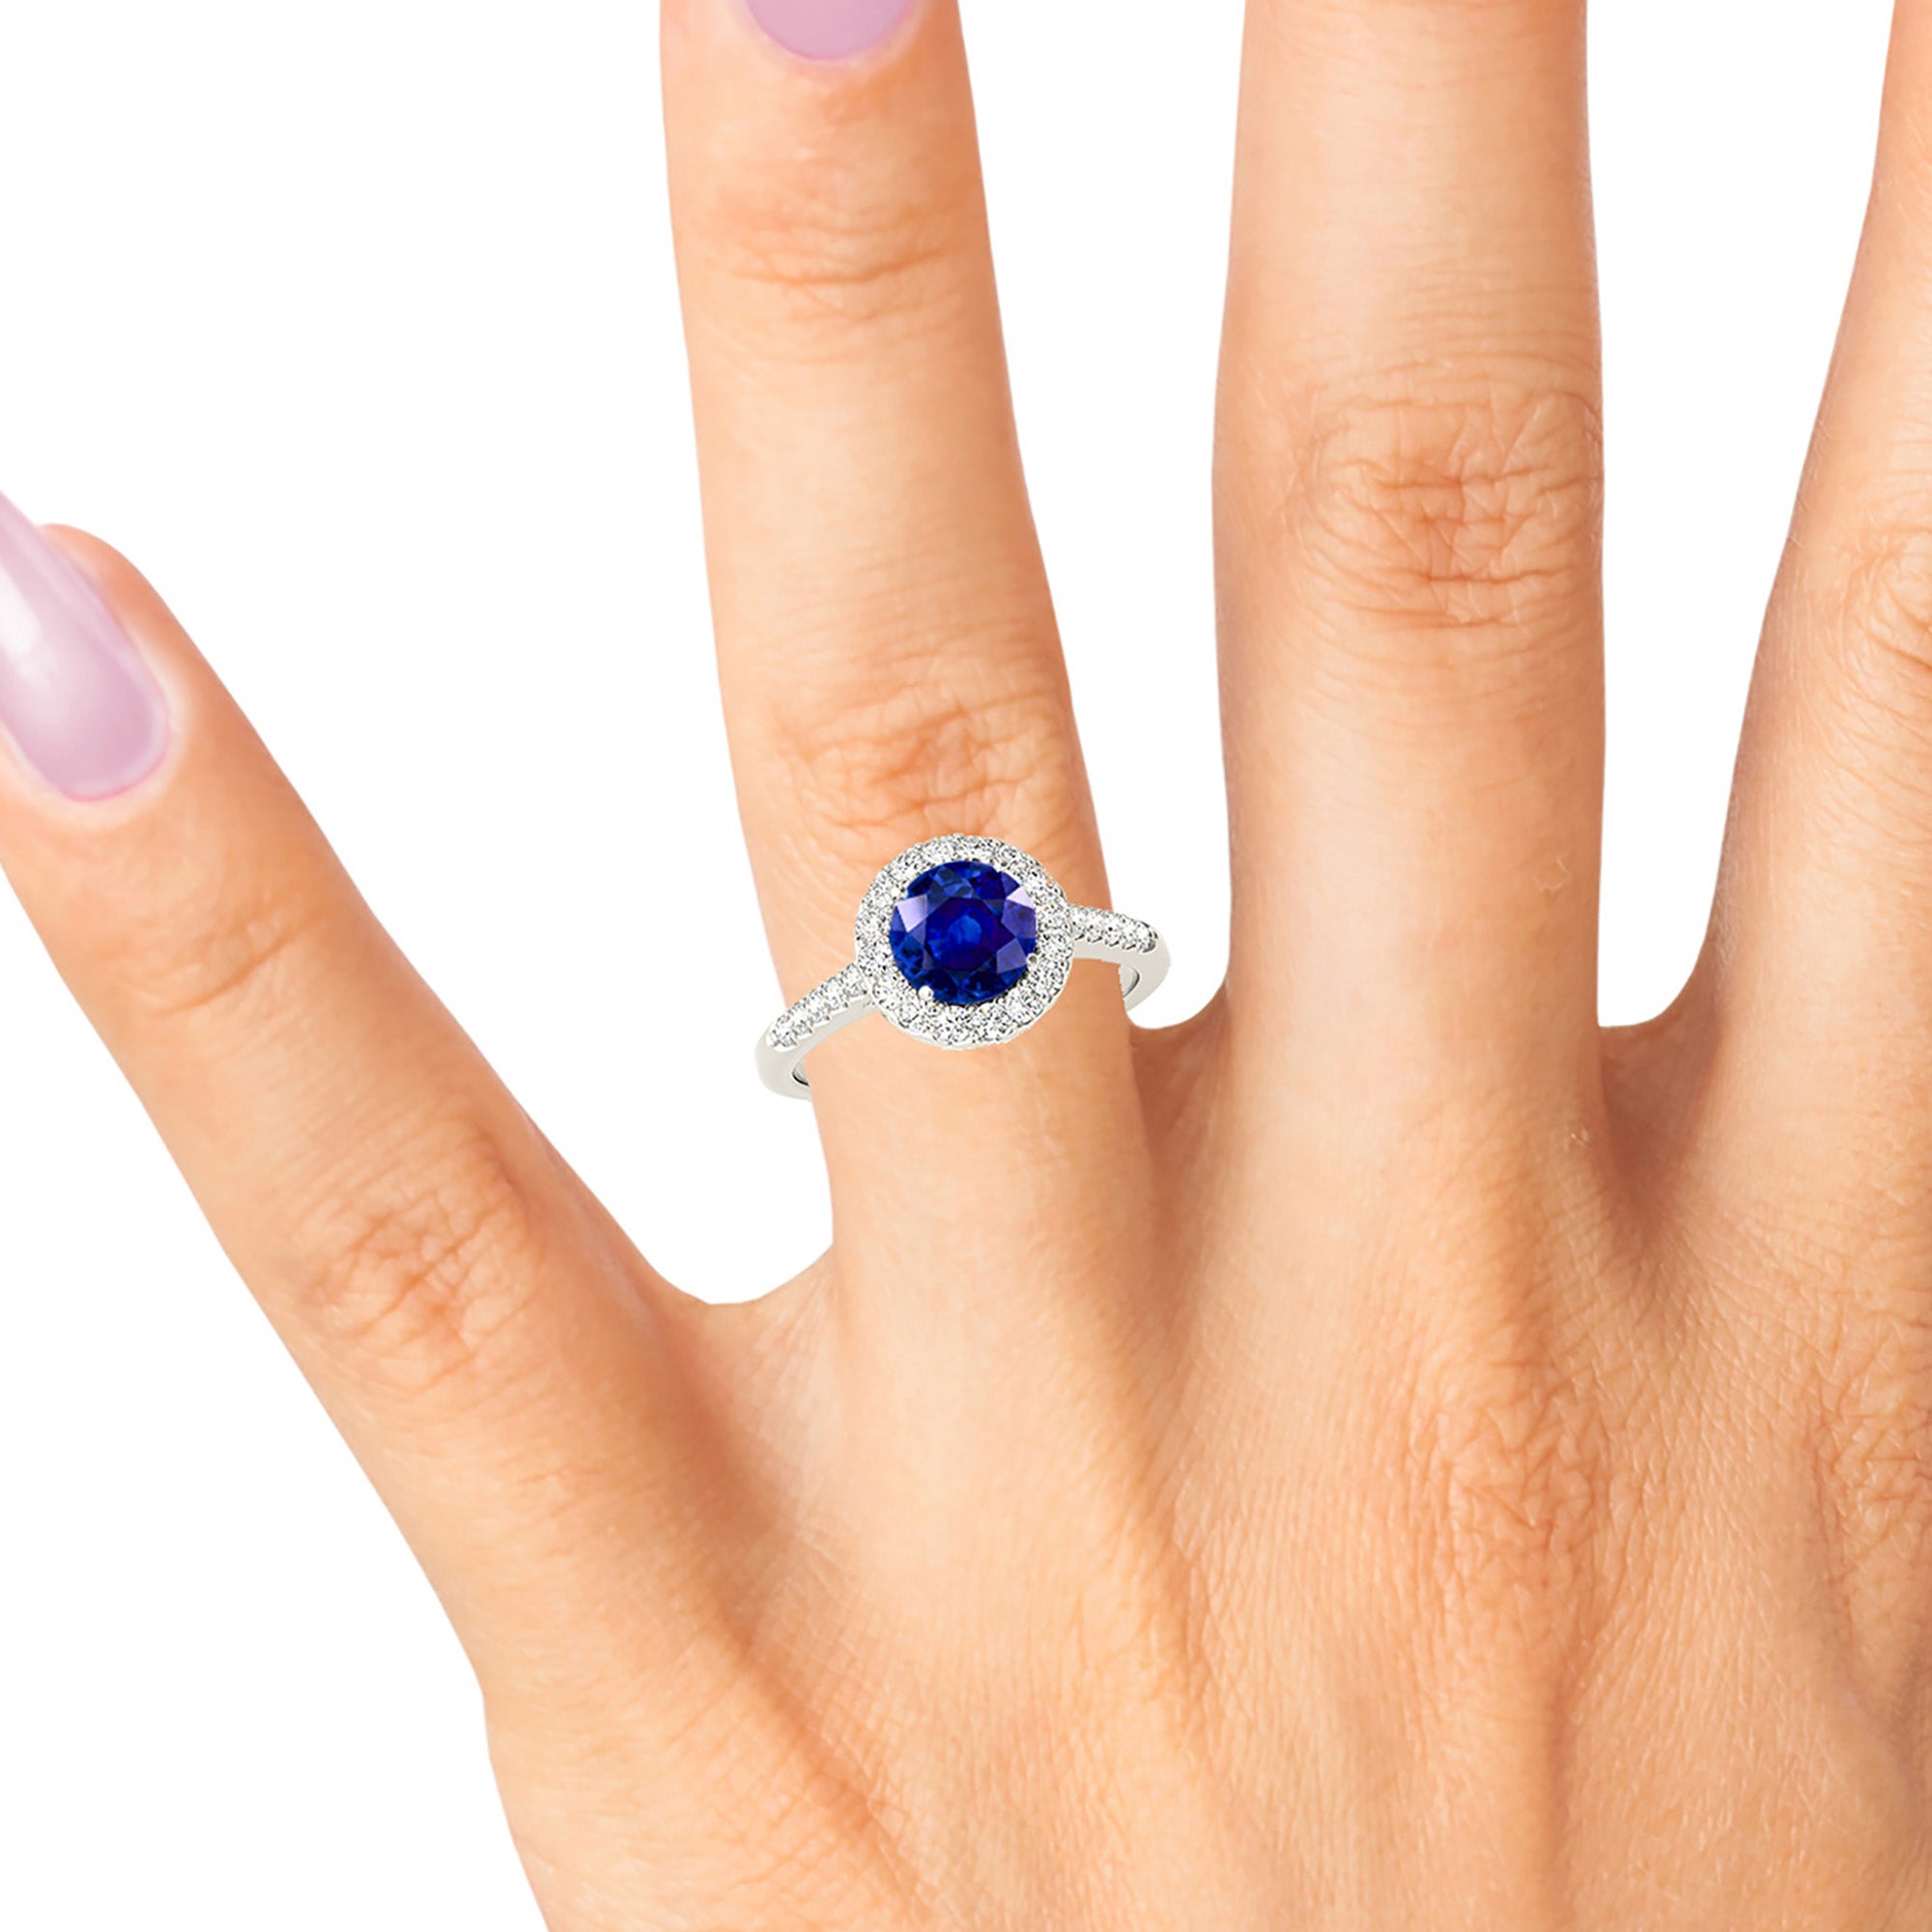 1.35 ct. Genuine Blue Sapphire Halo Ring With 0.40 ctw. Side Diamonds-in 14K/18K White, Yellow, Rose Gold and Platinum - Christmas Jewelry Gift -VIRABYANI